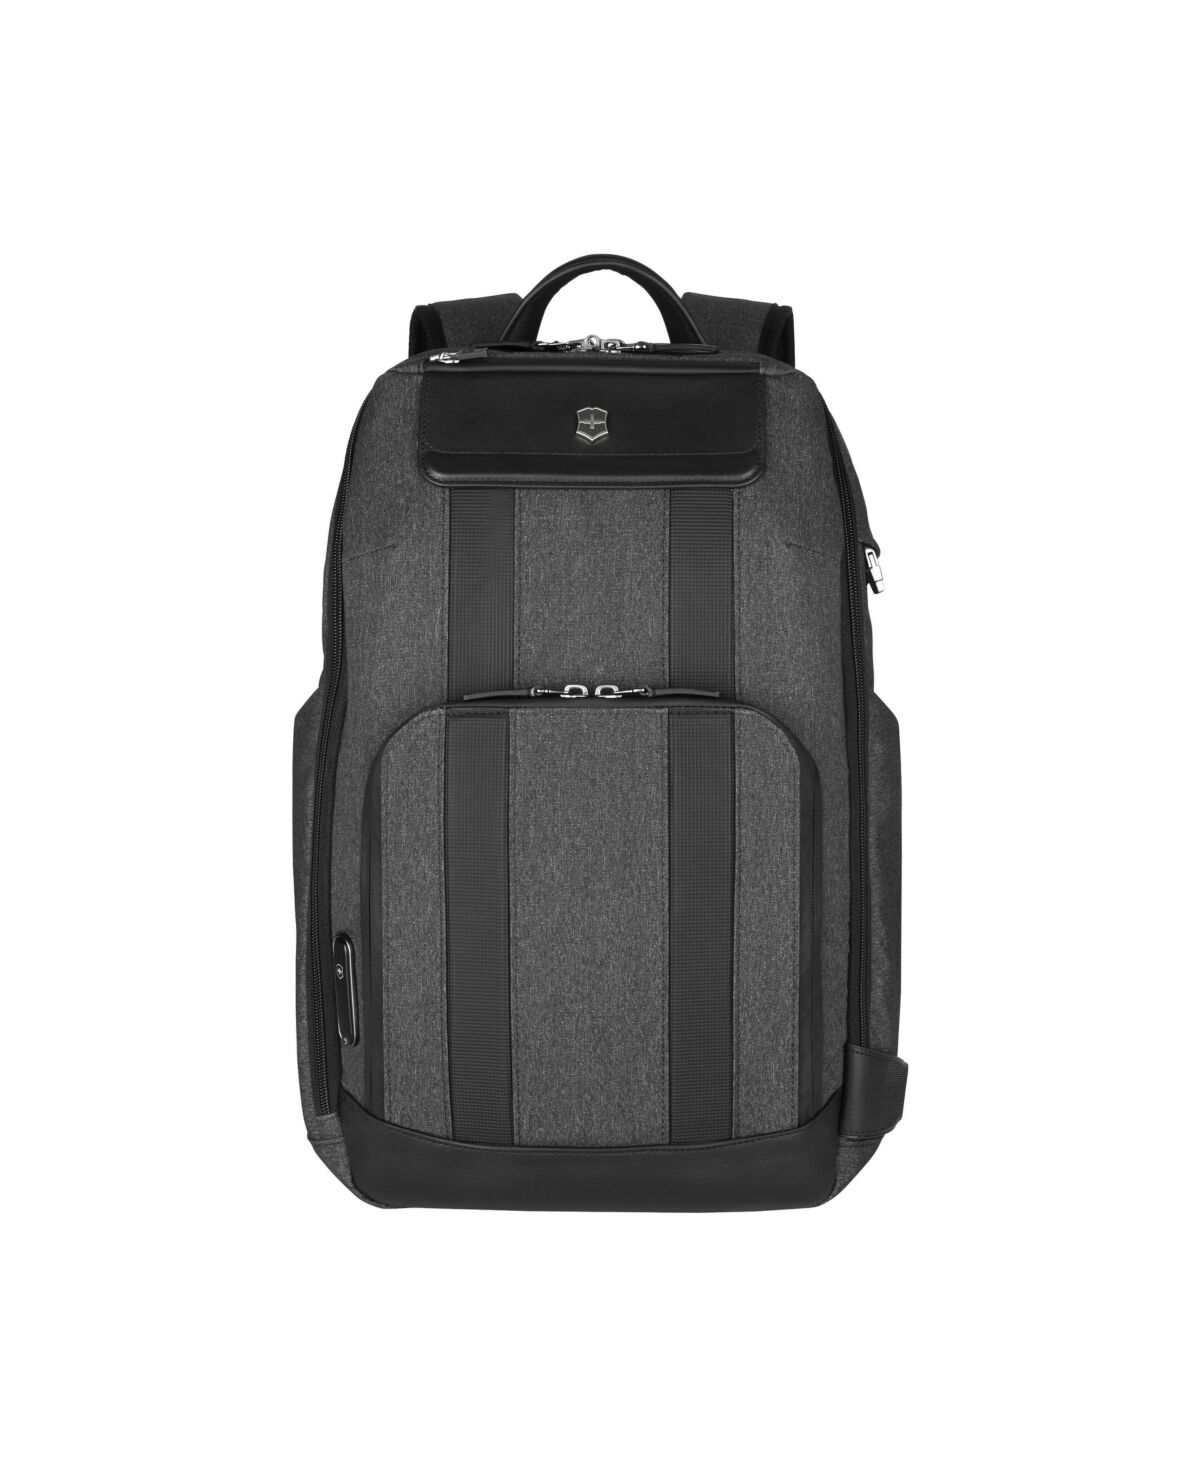 Victorinox Architecture Urban 2 Deluxe Laptop Backpack - Gray